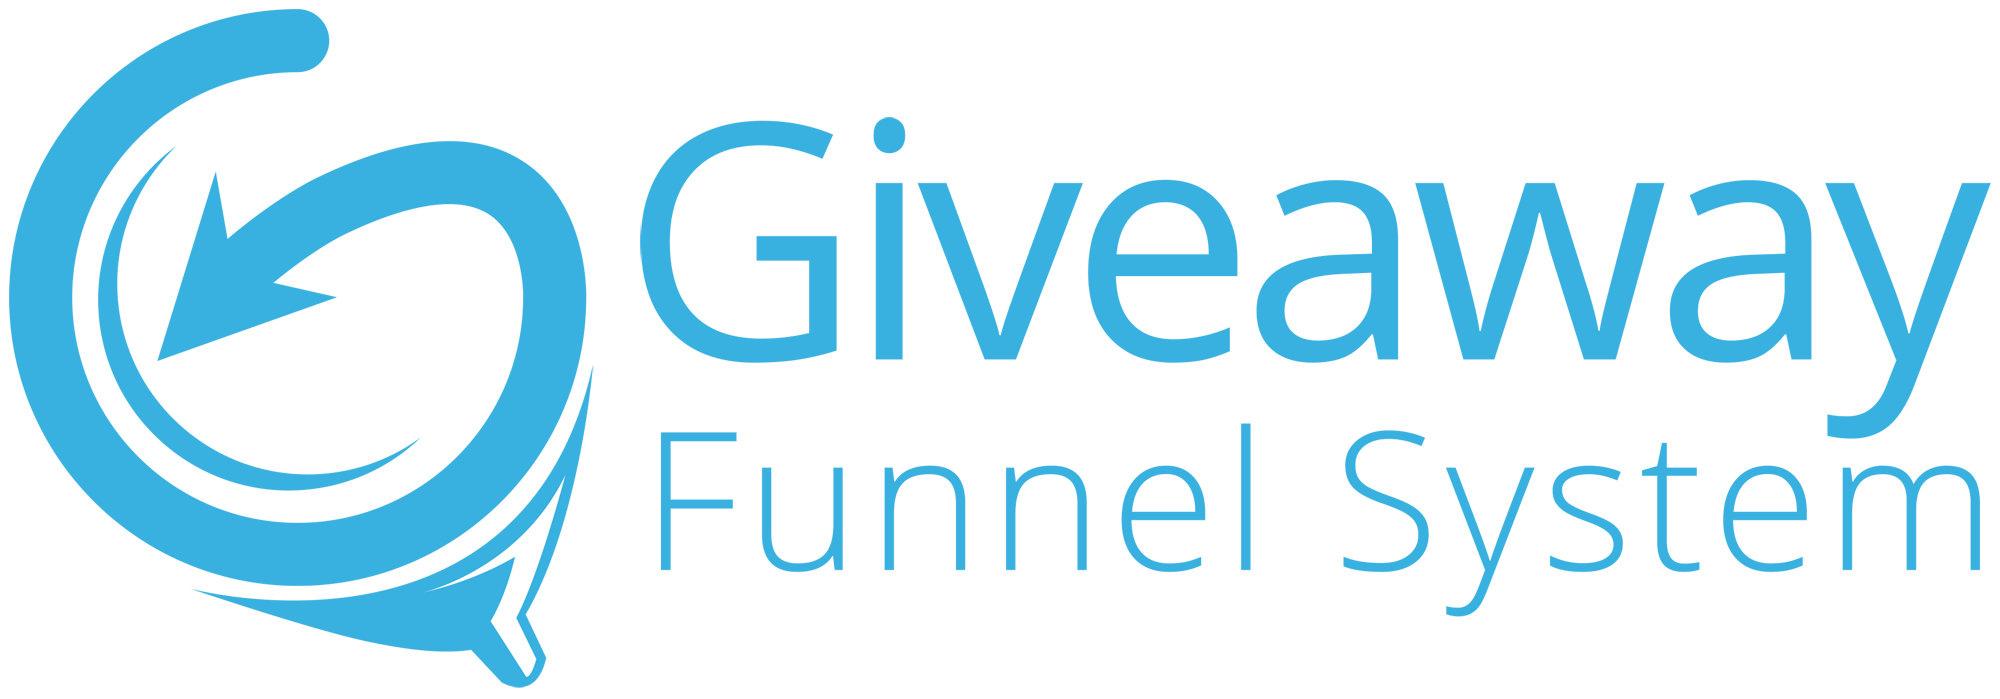 Giveaway Funnel